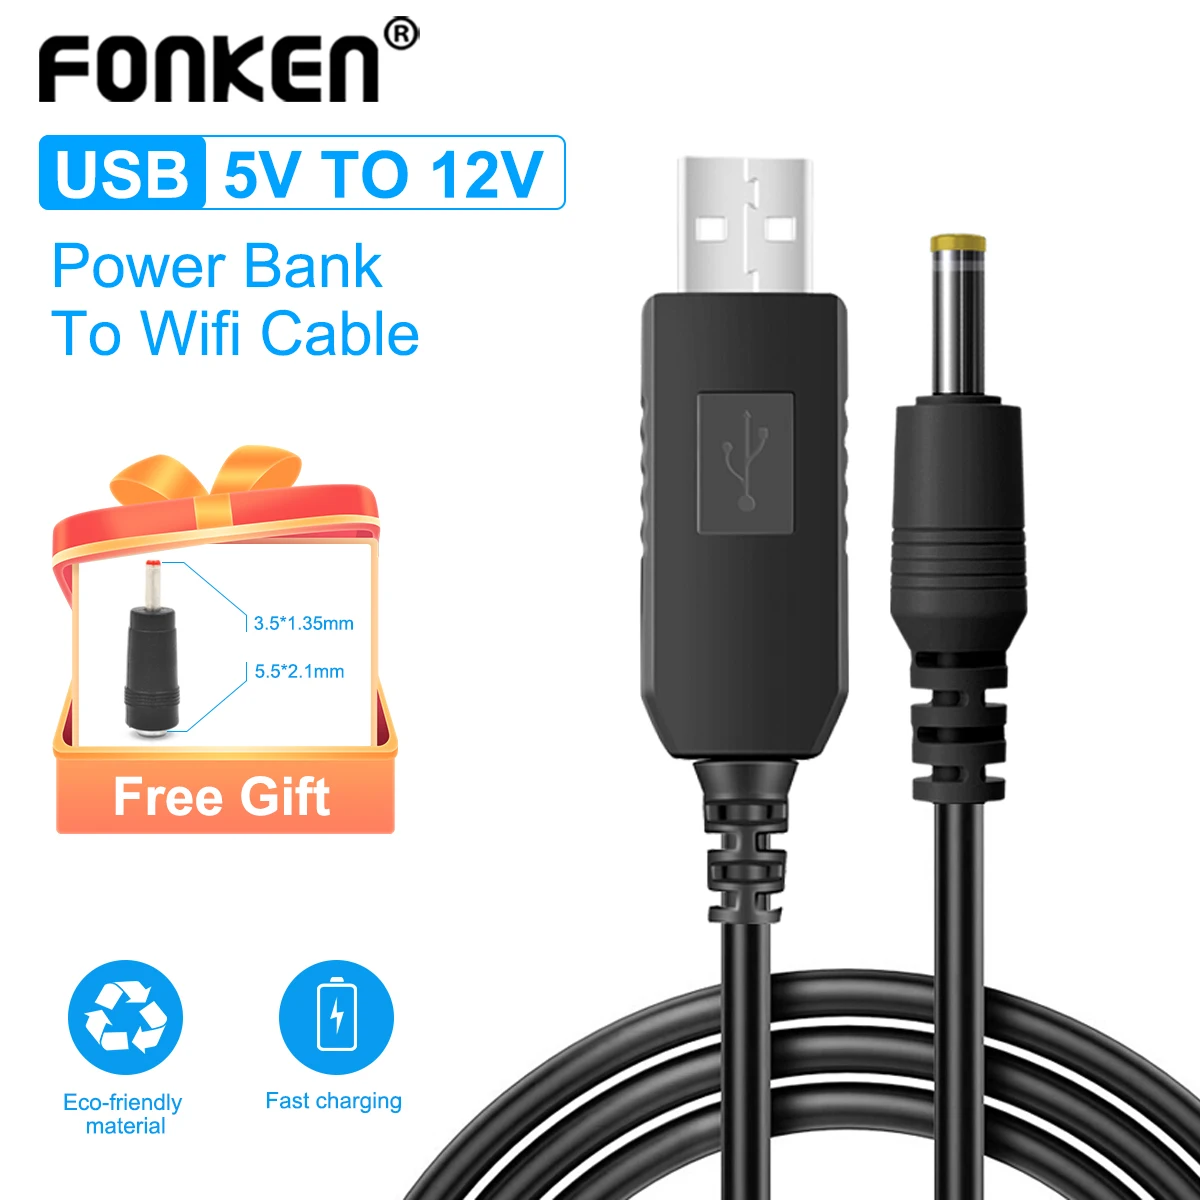 Fonken WiFi to Powerbank Cable Connector DC 5V to 12V USB Cable Boost Converter Step-up Cord for Wifi Router Modem Fan Speaker